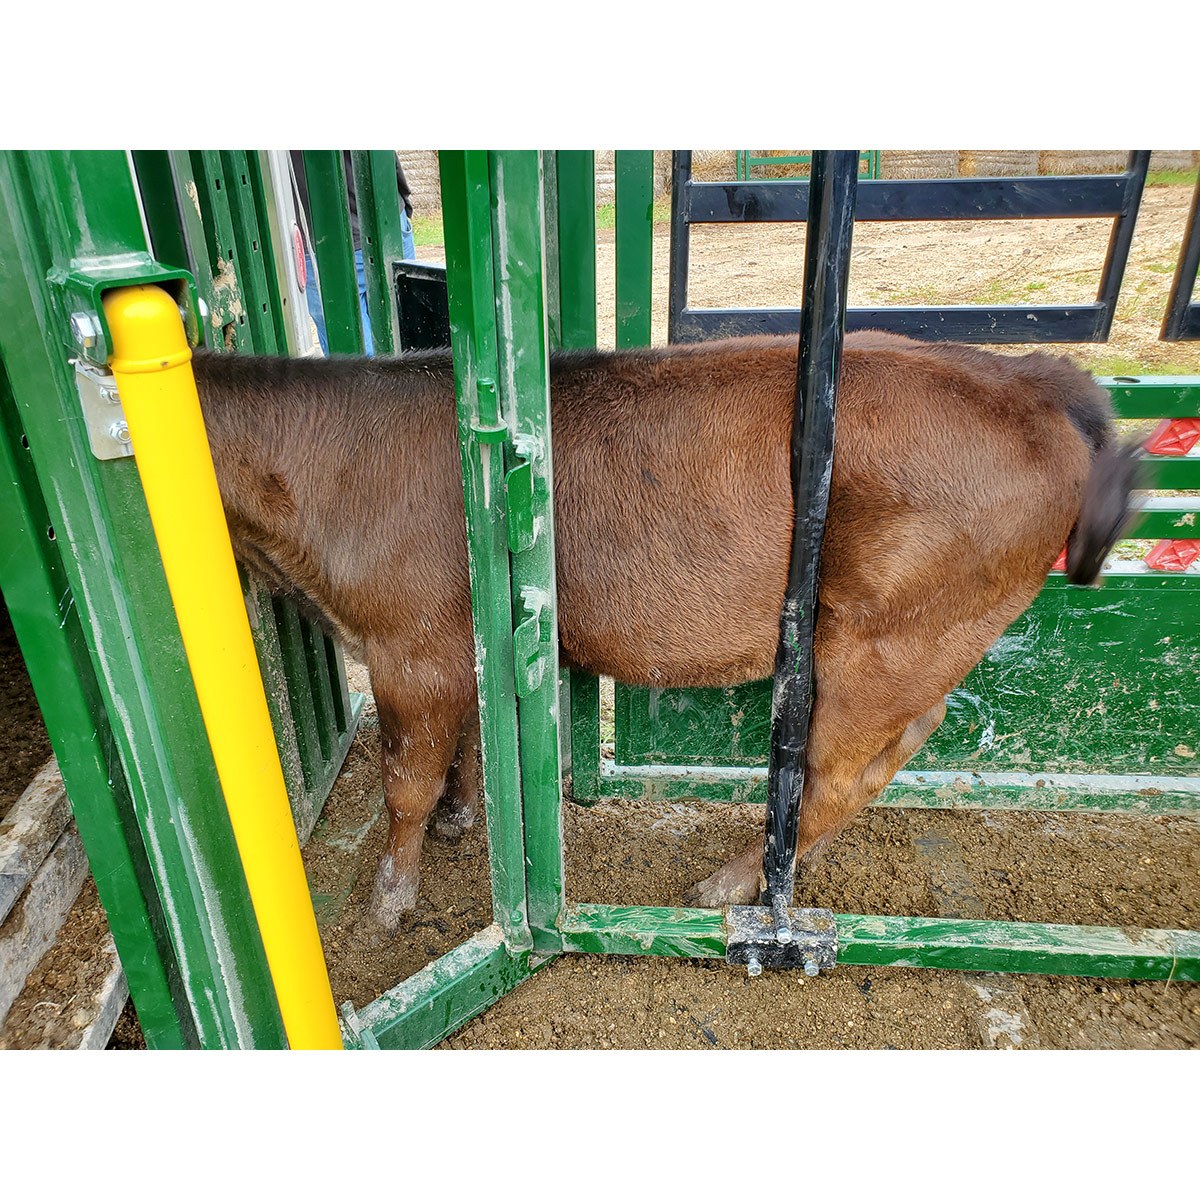 Calf in Arrowquip chute with trimming bar